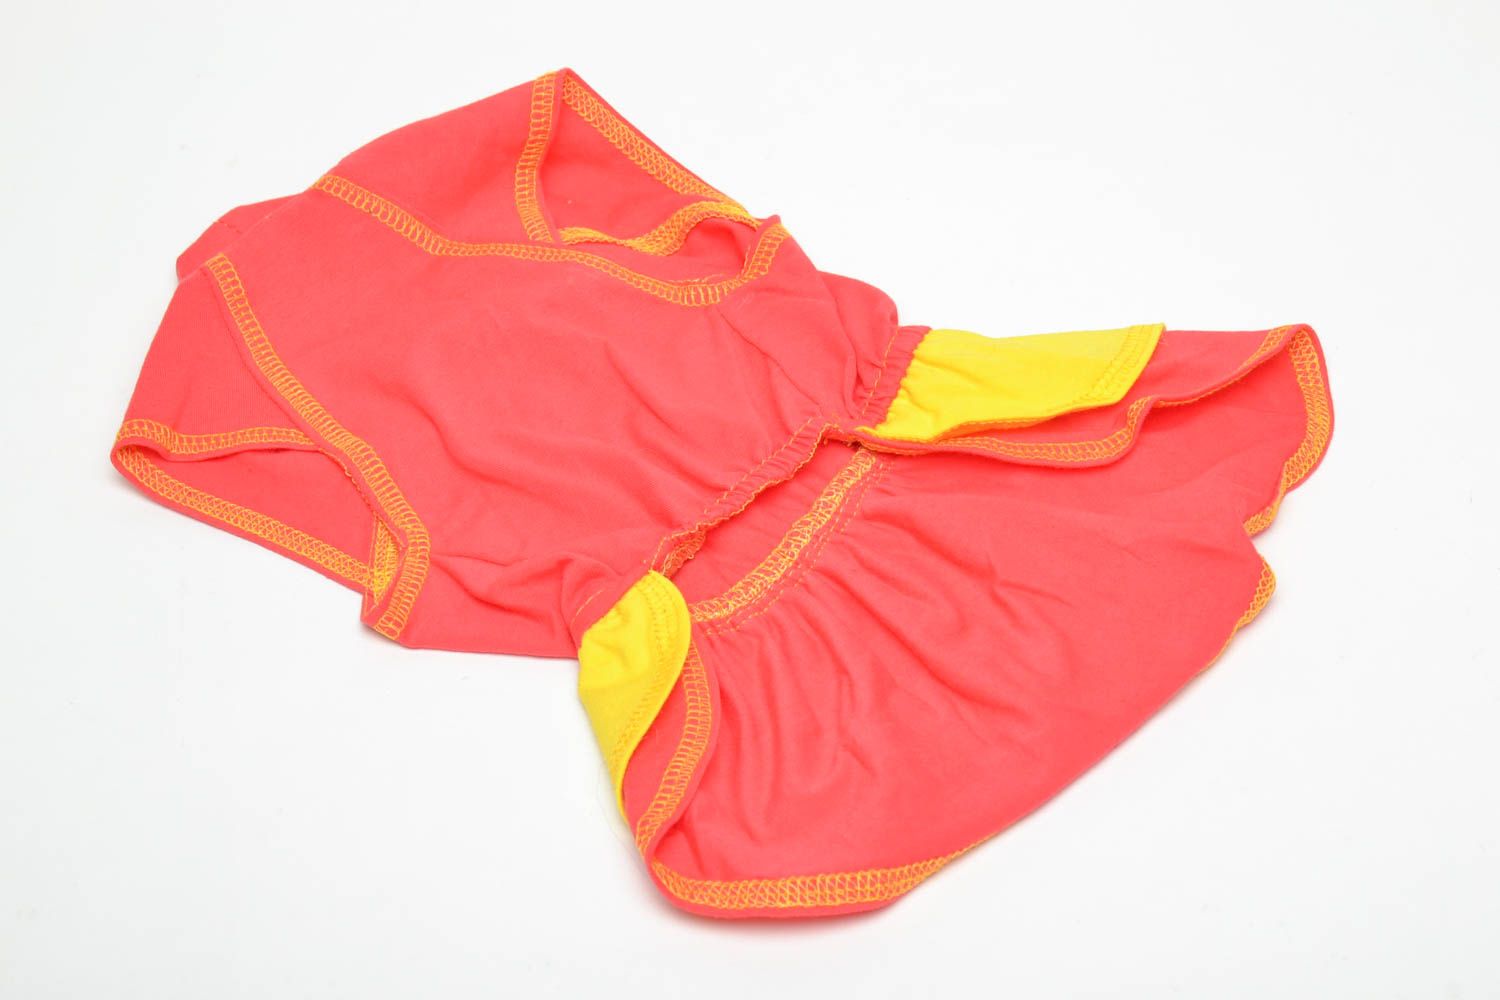 Red and yellow dog dress photo 5